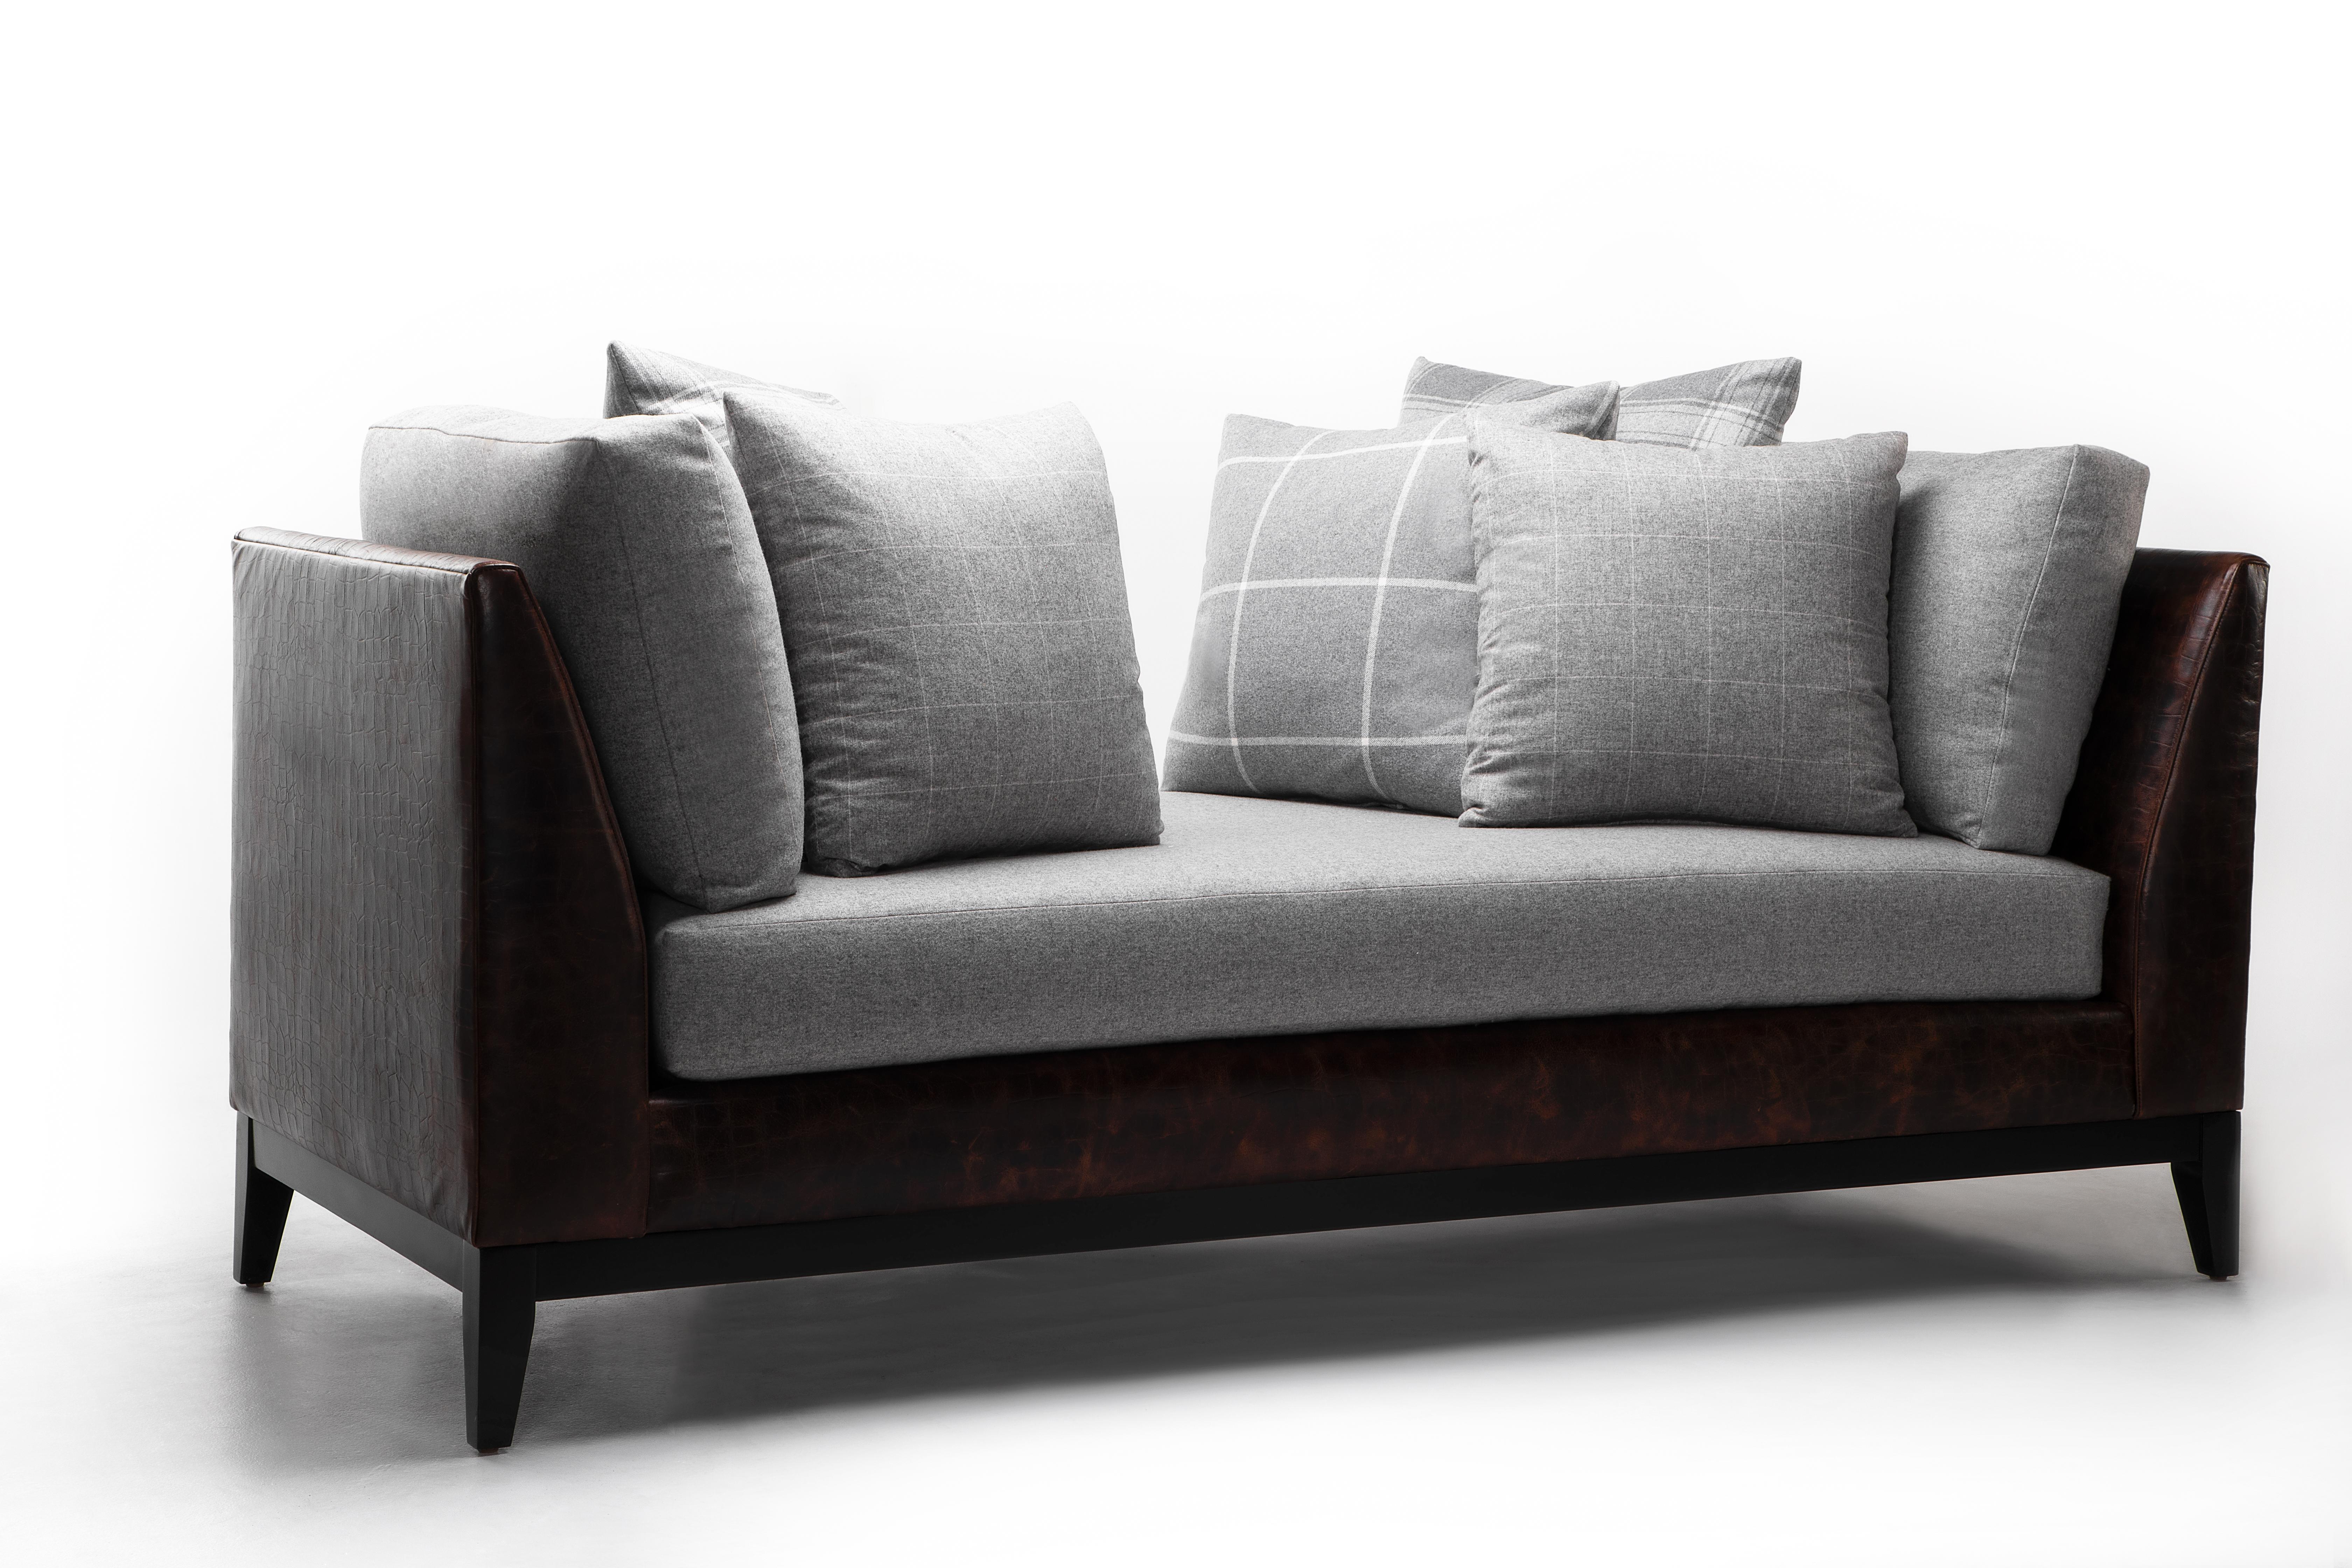 Domenico daybed is handsome yet functional. Anchored by a chocolate leather-covered base, this modern daybed emotes a sleek and cozy feeling with its grey Cavalier wool cushions and coordinating Ralph Lauren plaid pillows. Additional fabrics